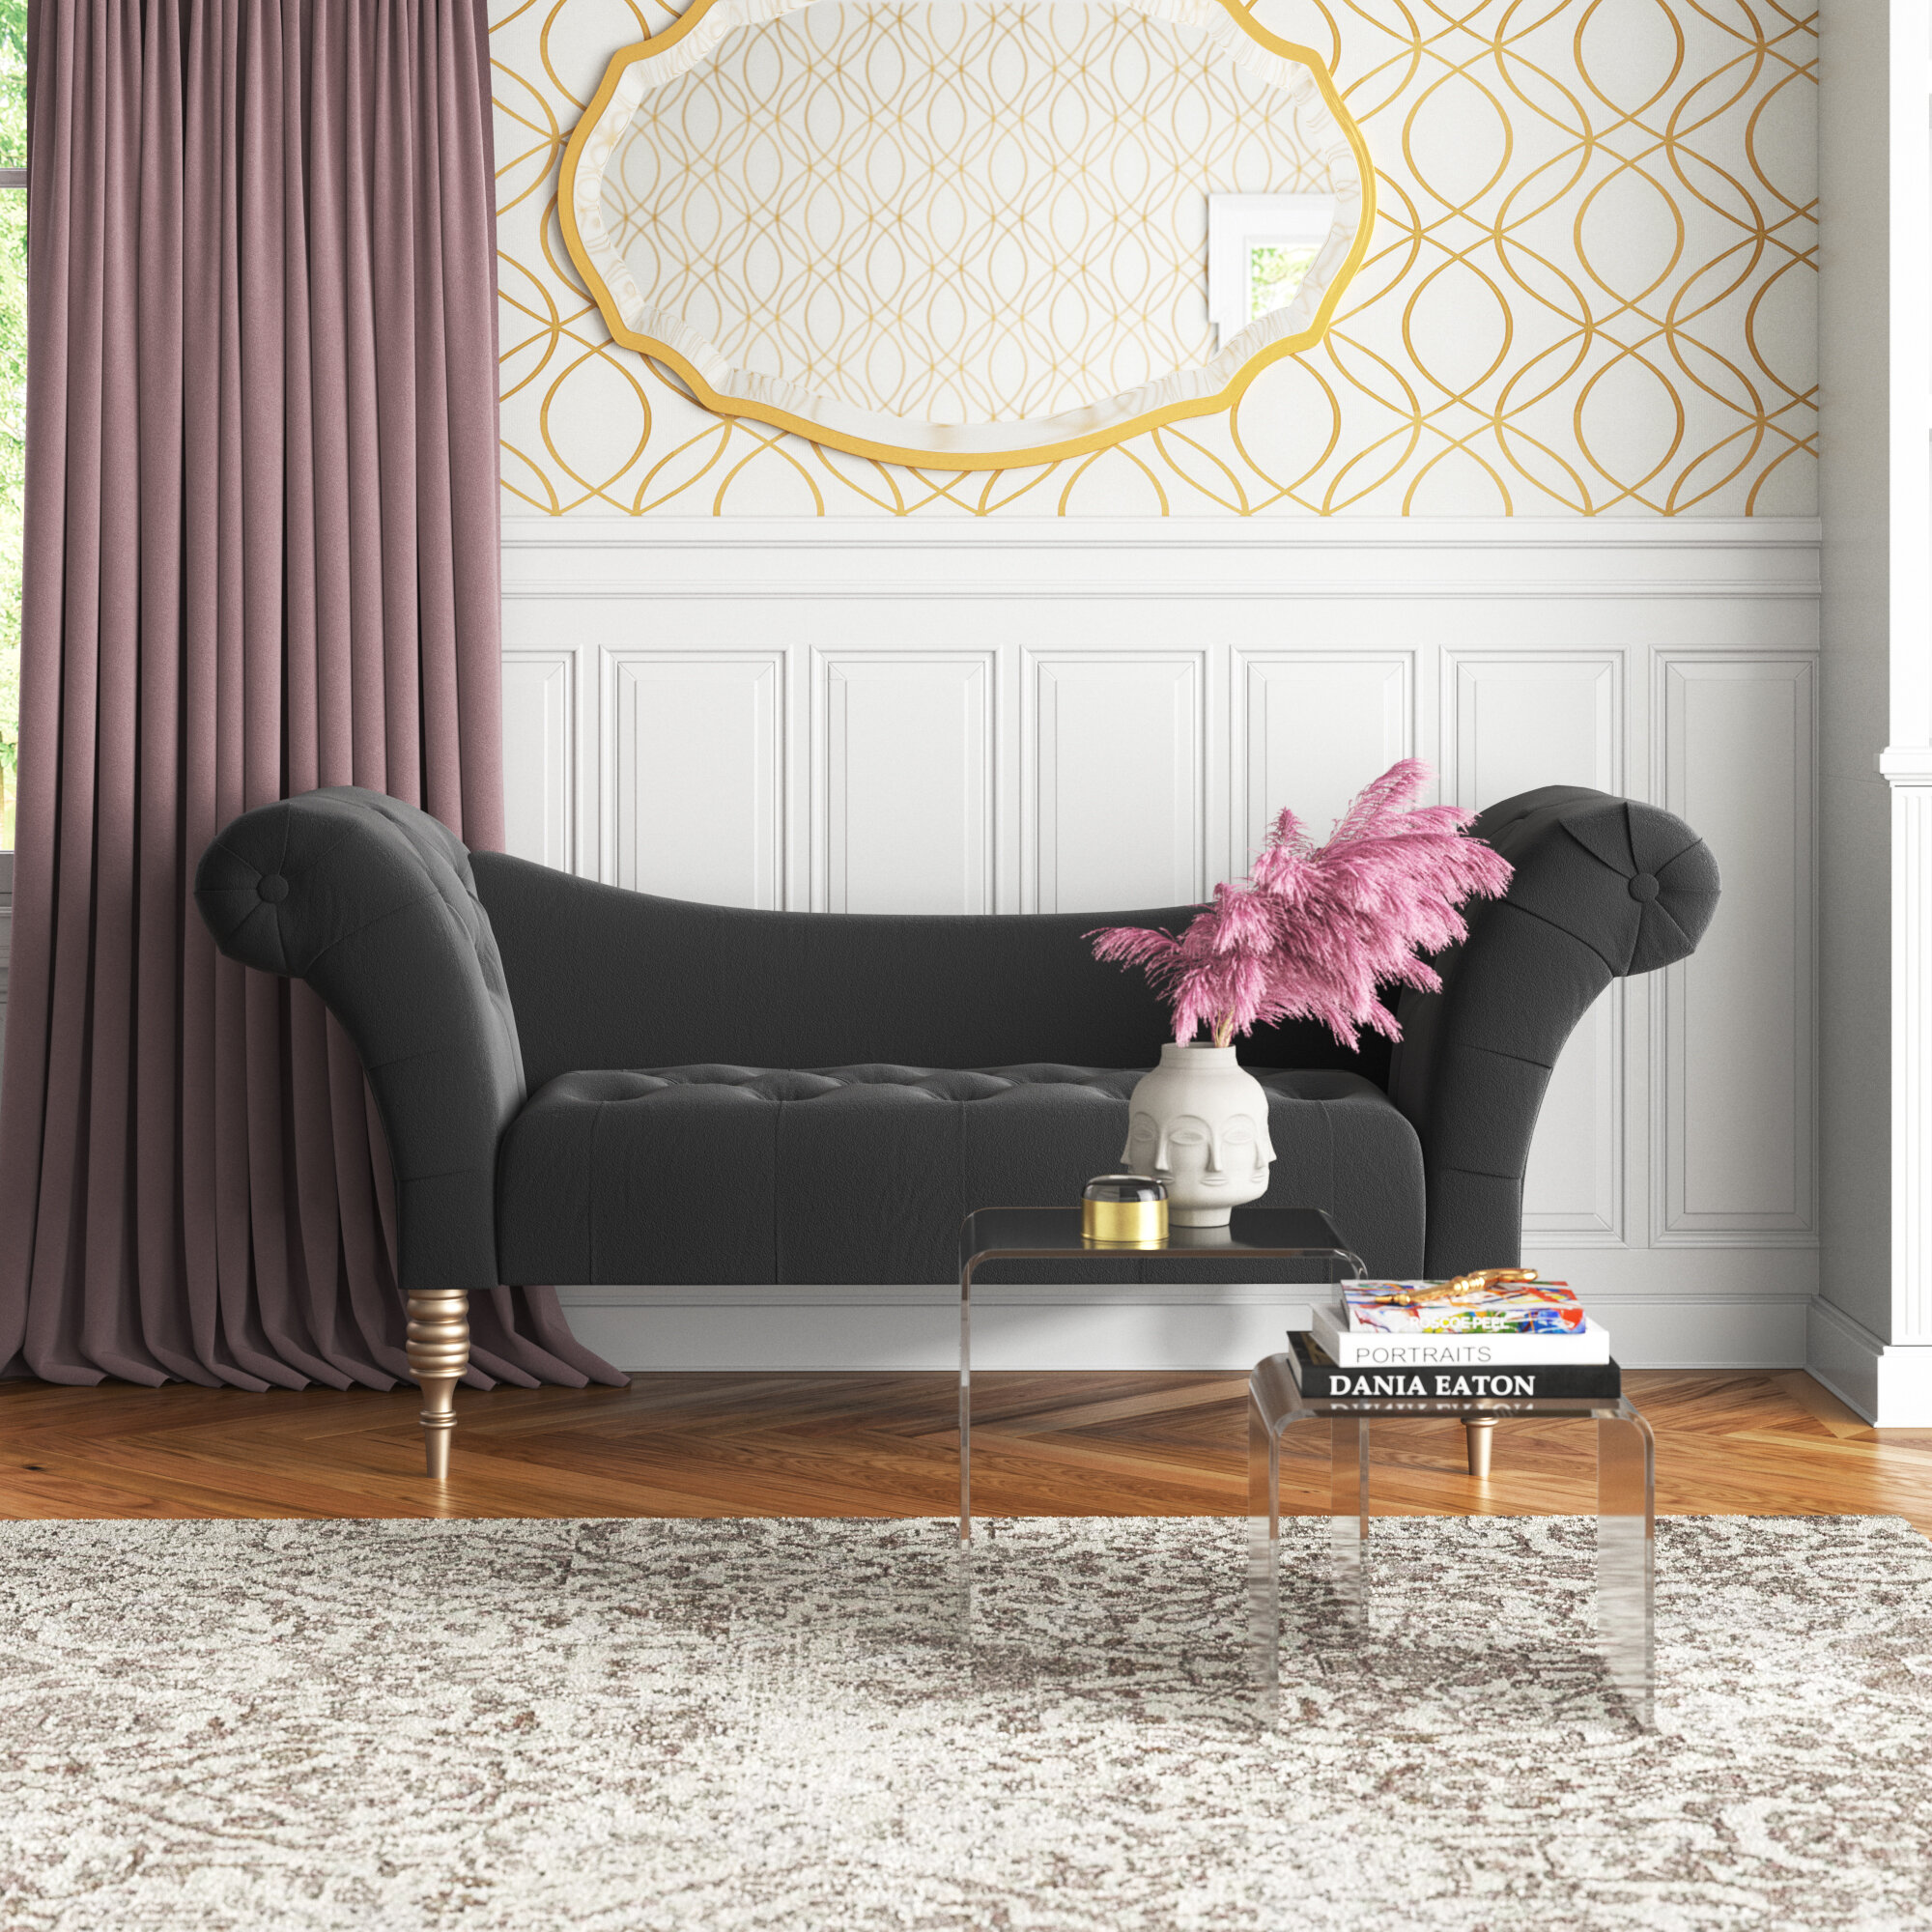 Barbera Upholstered Chaise Lounge